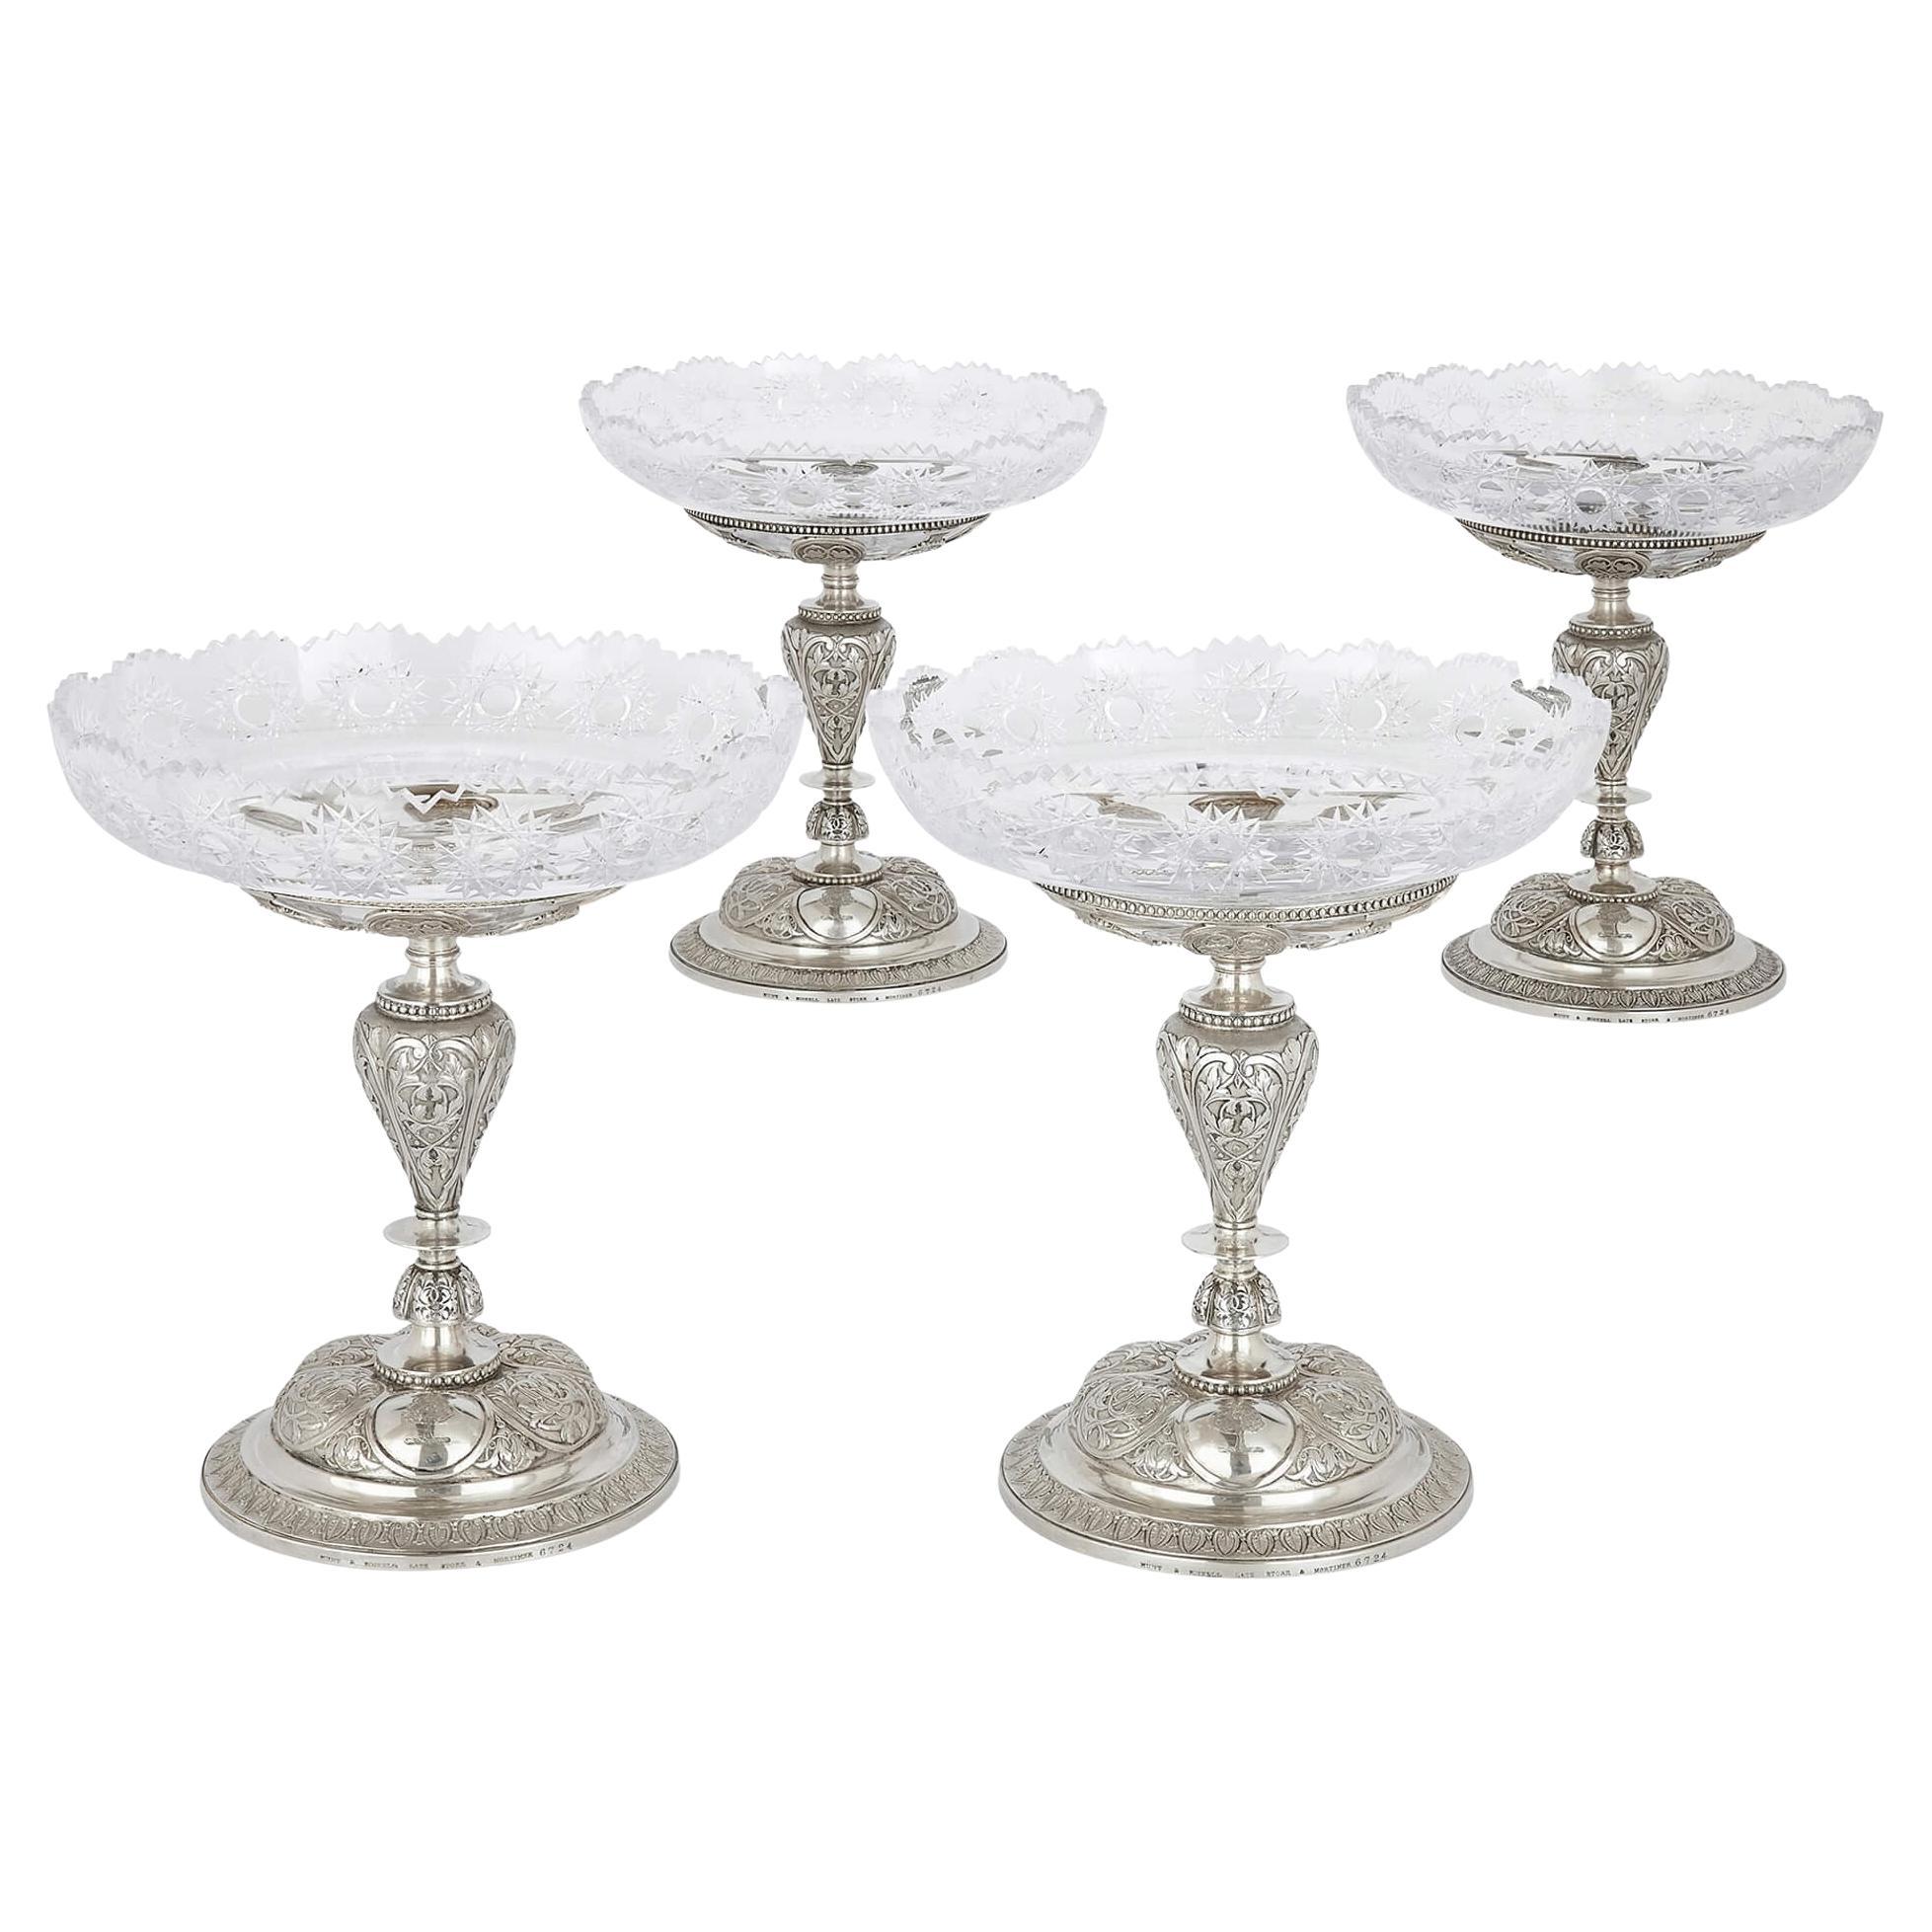 Set of Four Victorian Silver Stands by Hunt & Roskell, London